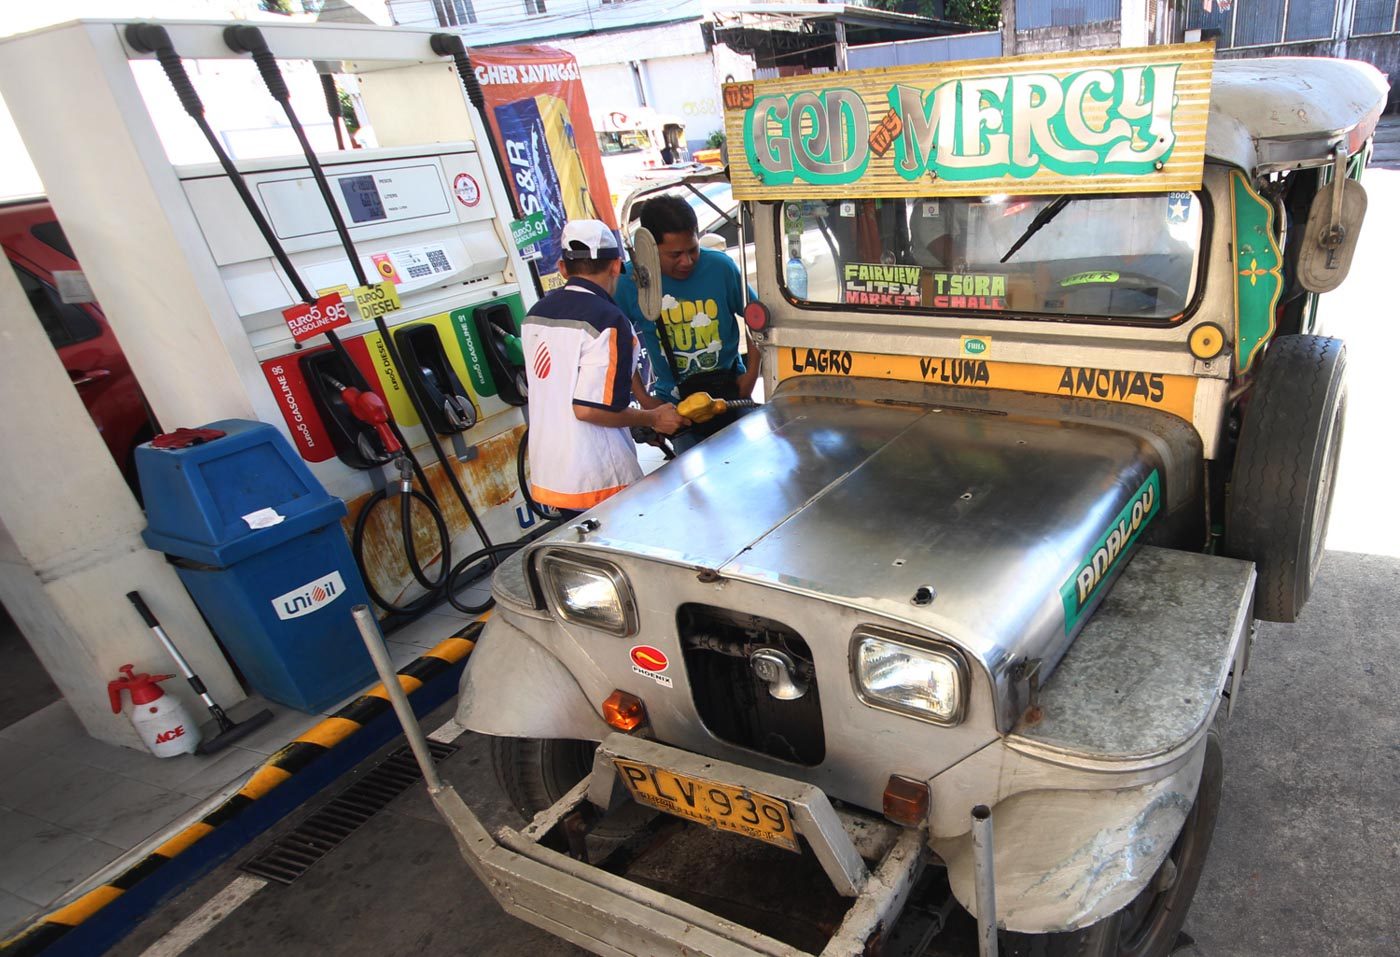 Finally, a rollback in oil prices on November 9